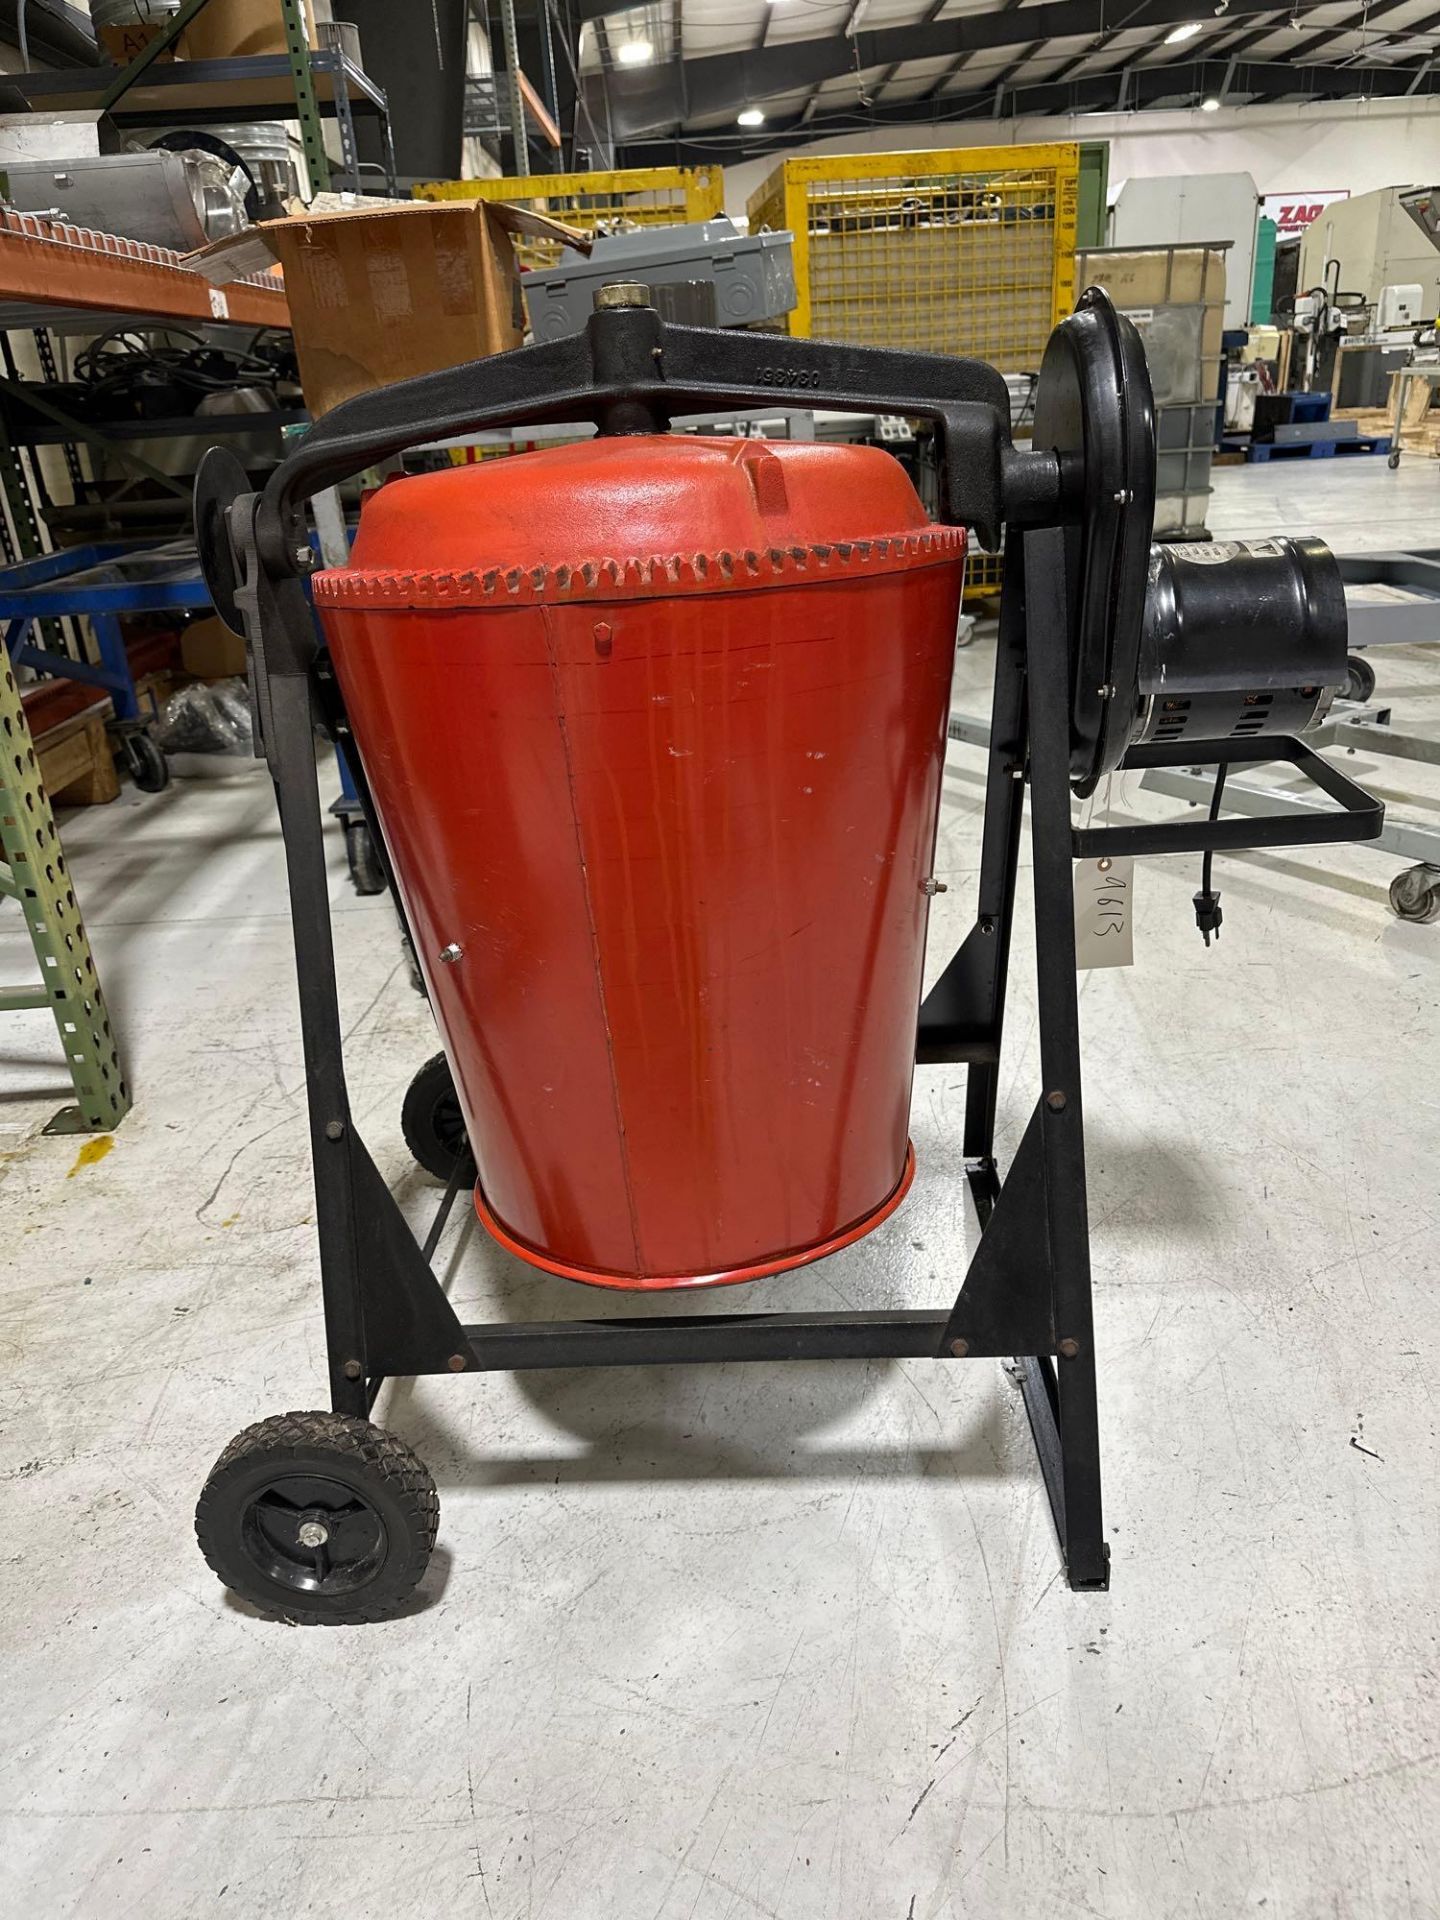 Red Lion RLX Resin Material Mixer, 110V, s/n 1395